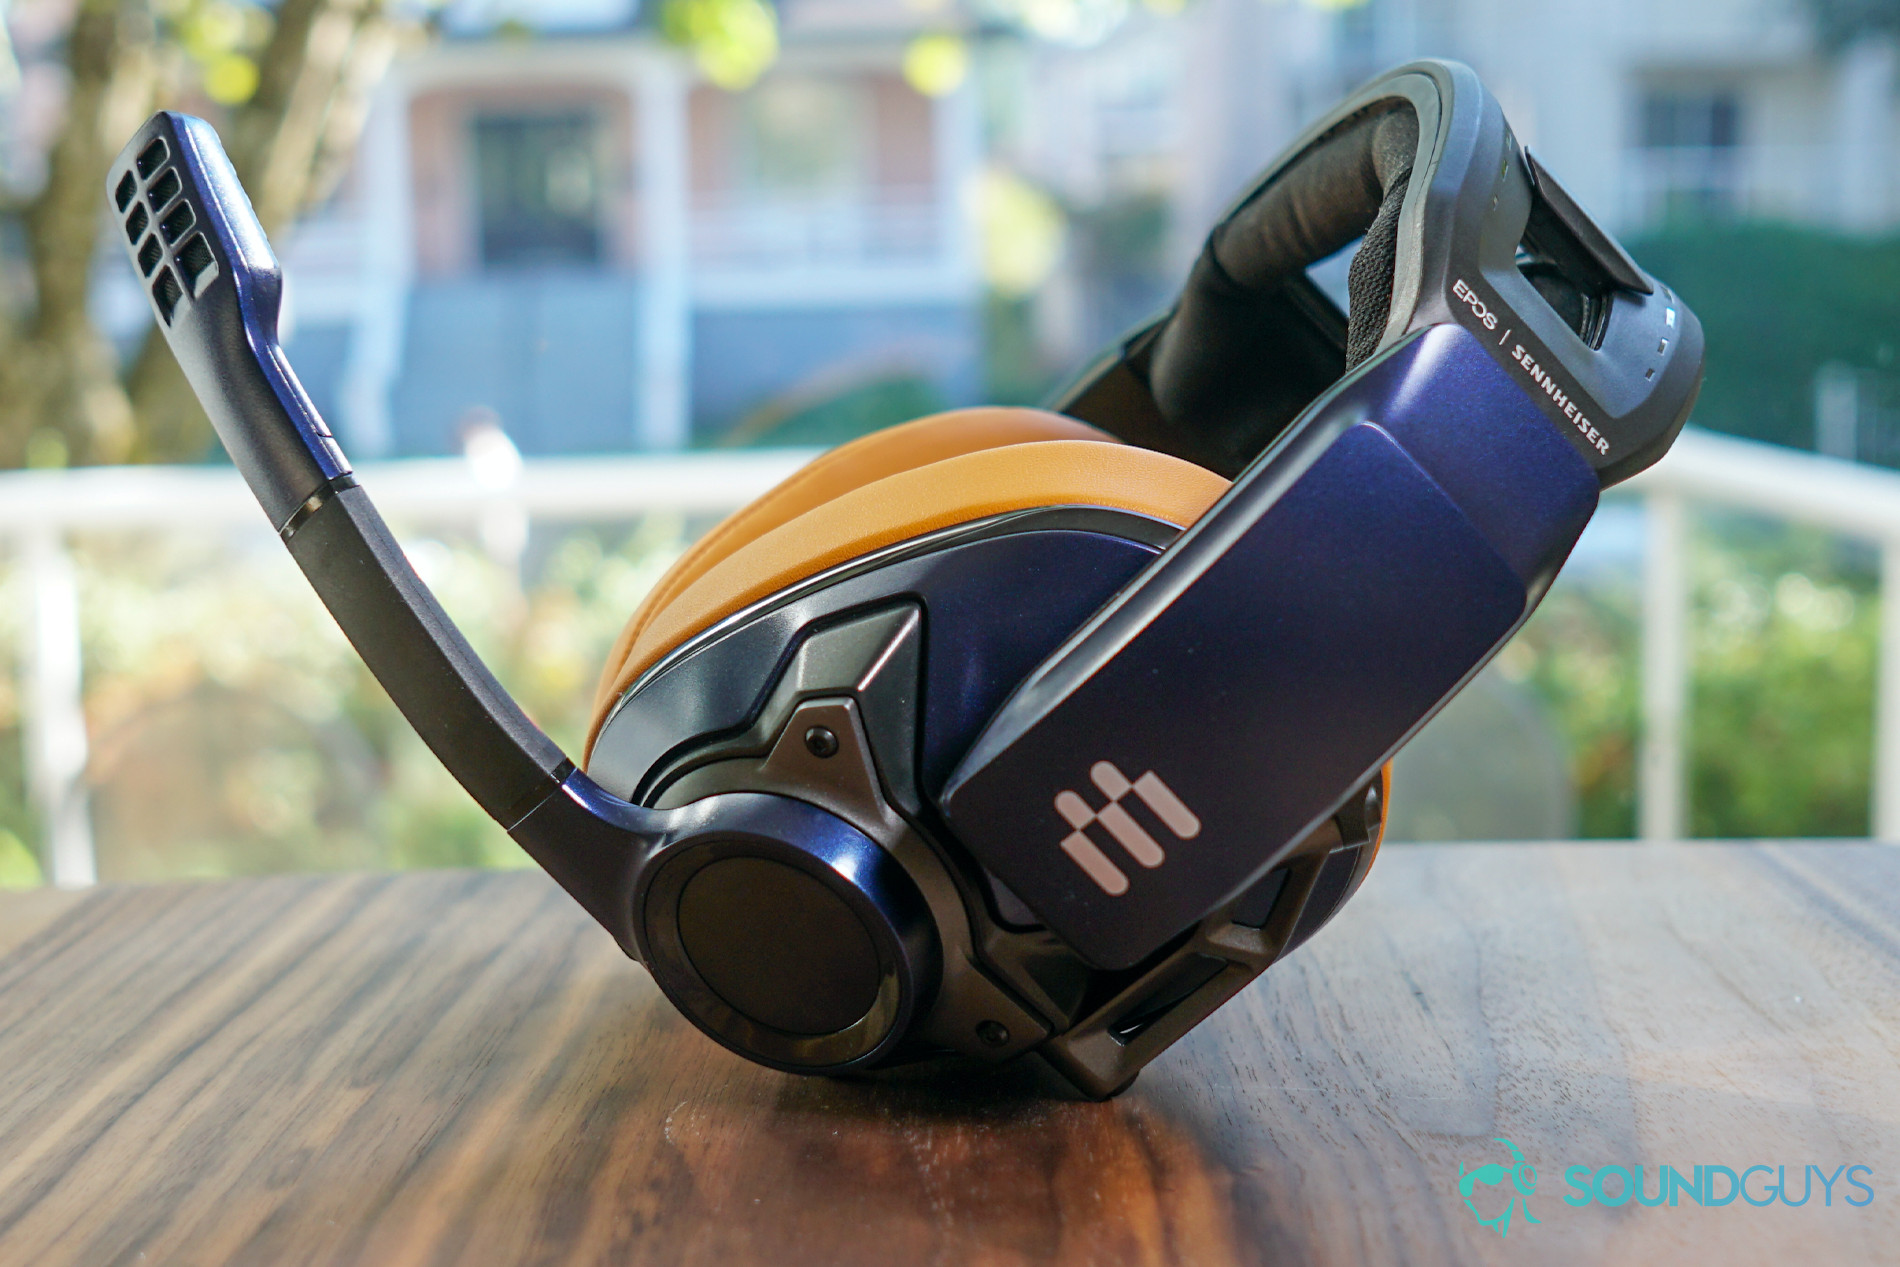 The EPOS Sennheiser GSP 602 gaming headset sits on a wooden table in front of an open window.